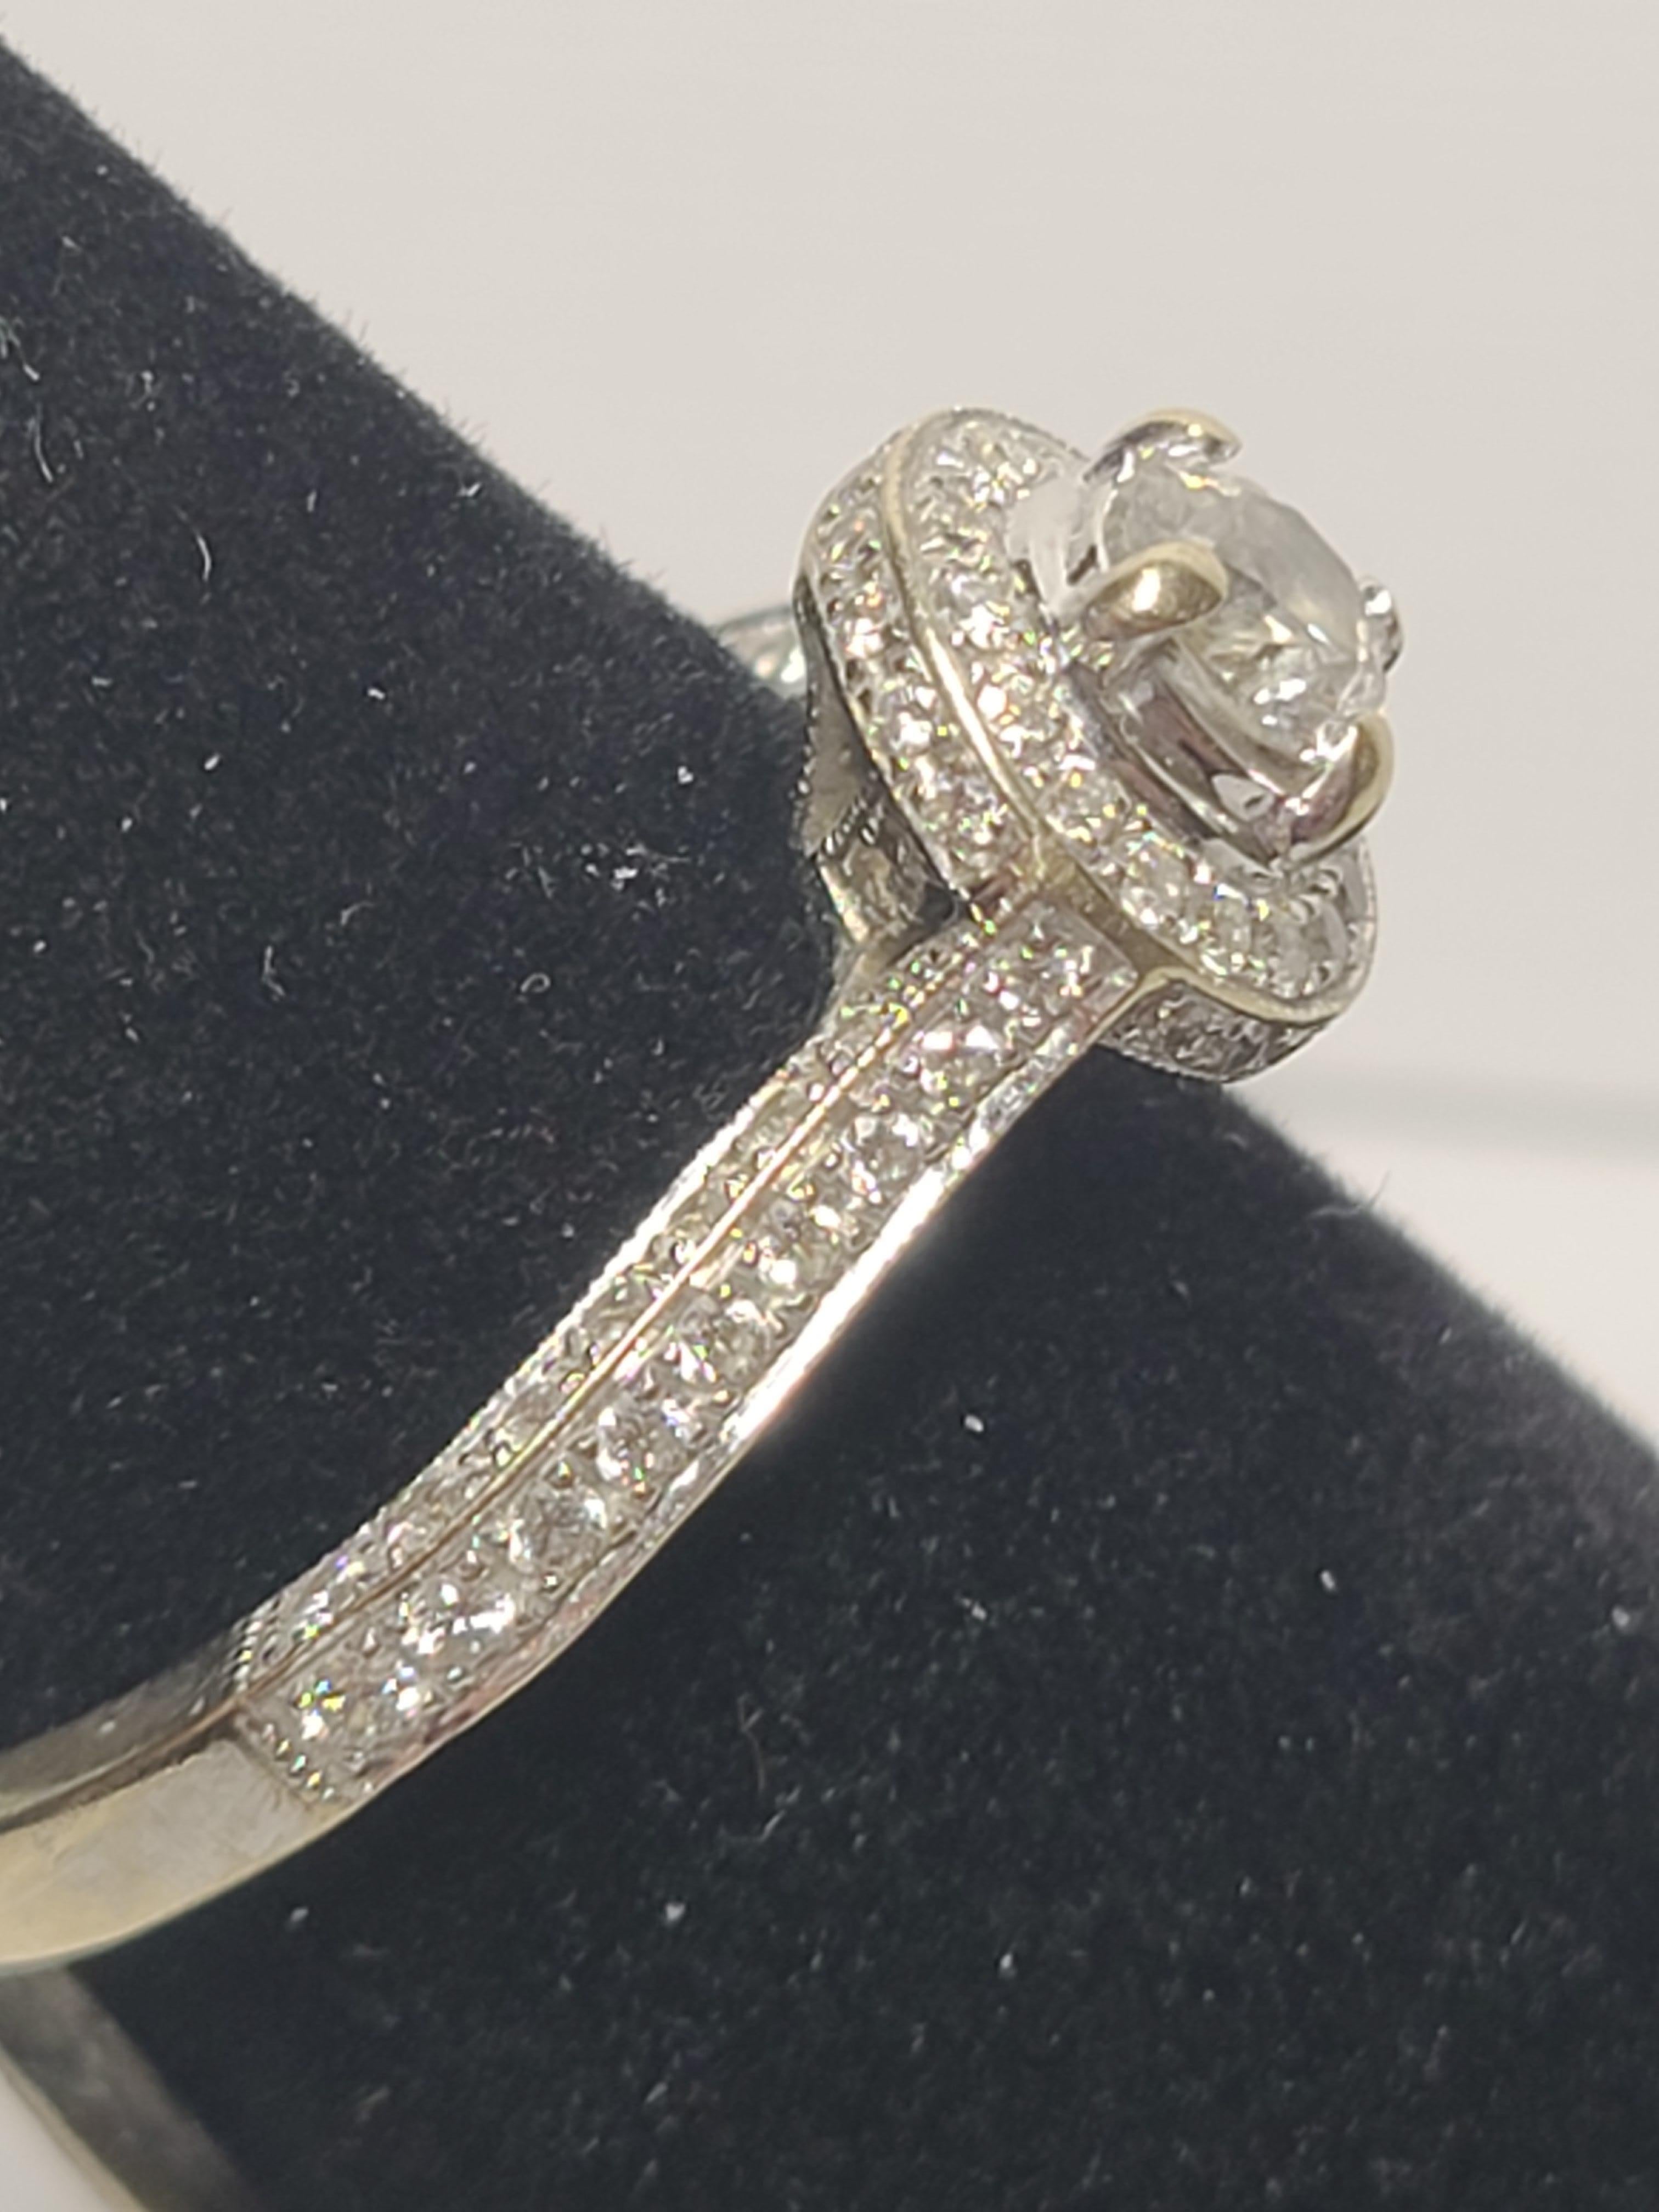 Diamond Halo Engagement Ring with Natural Stones In Good Condition For Sale In Endwell, NY